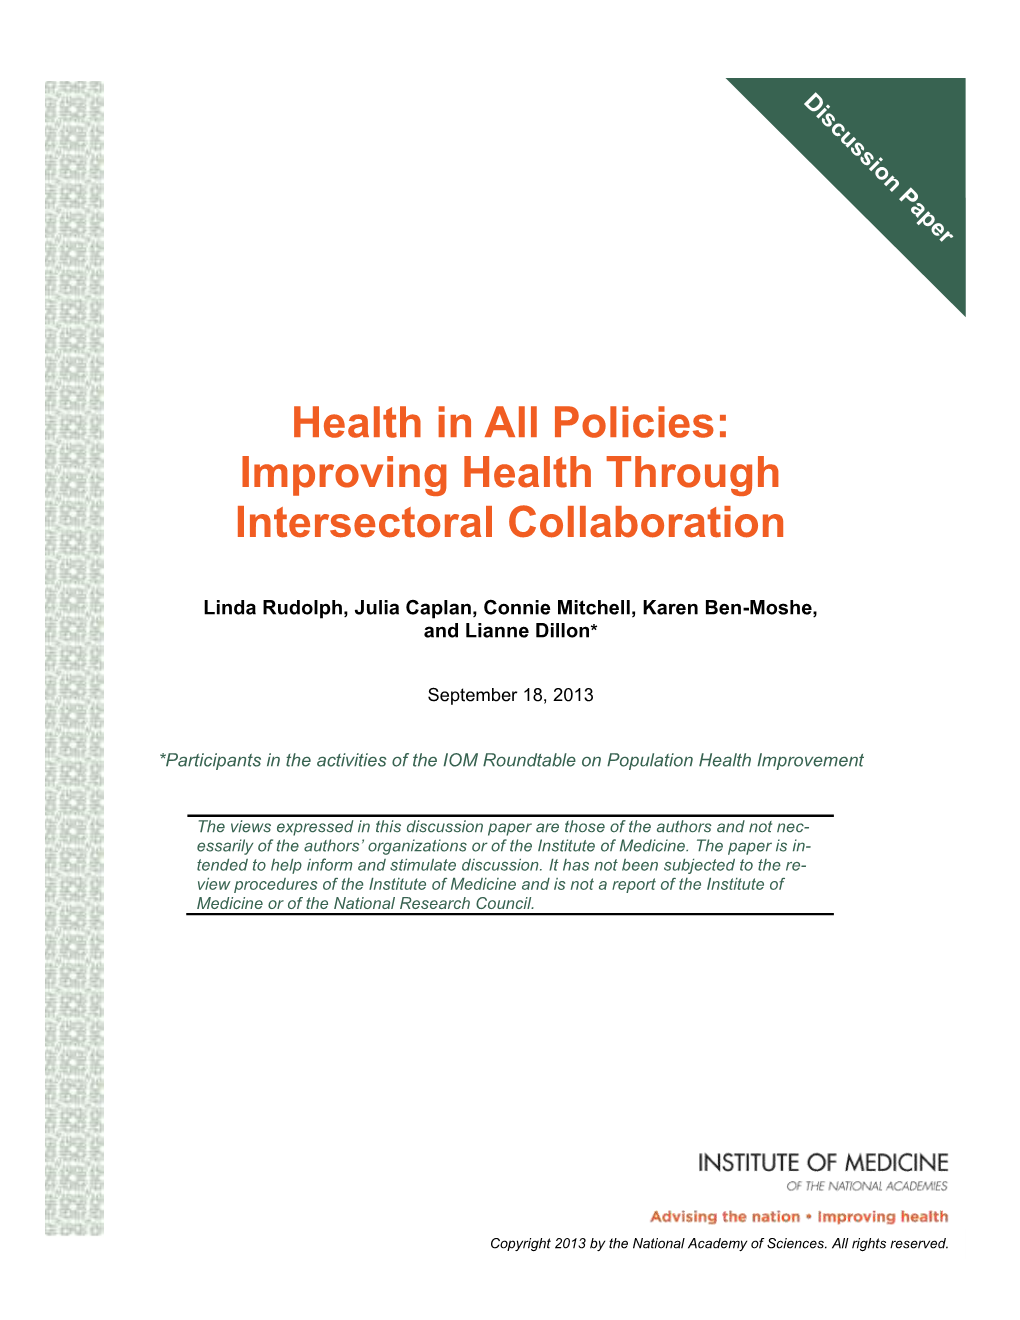 Health in All Policies: Improving Health Through Intersectoral Collaboration